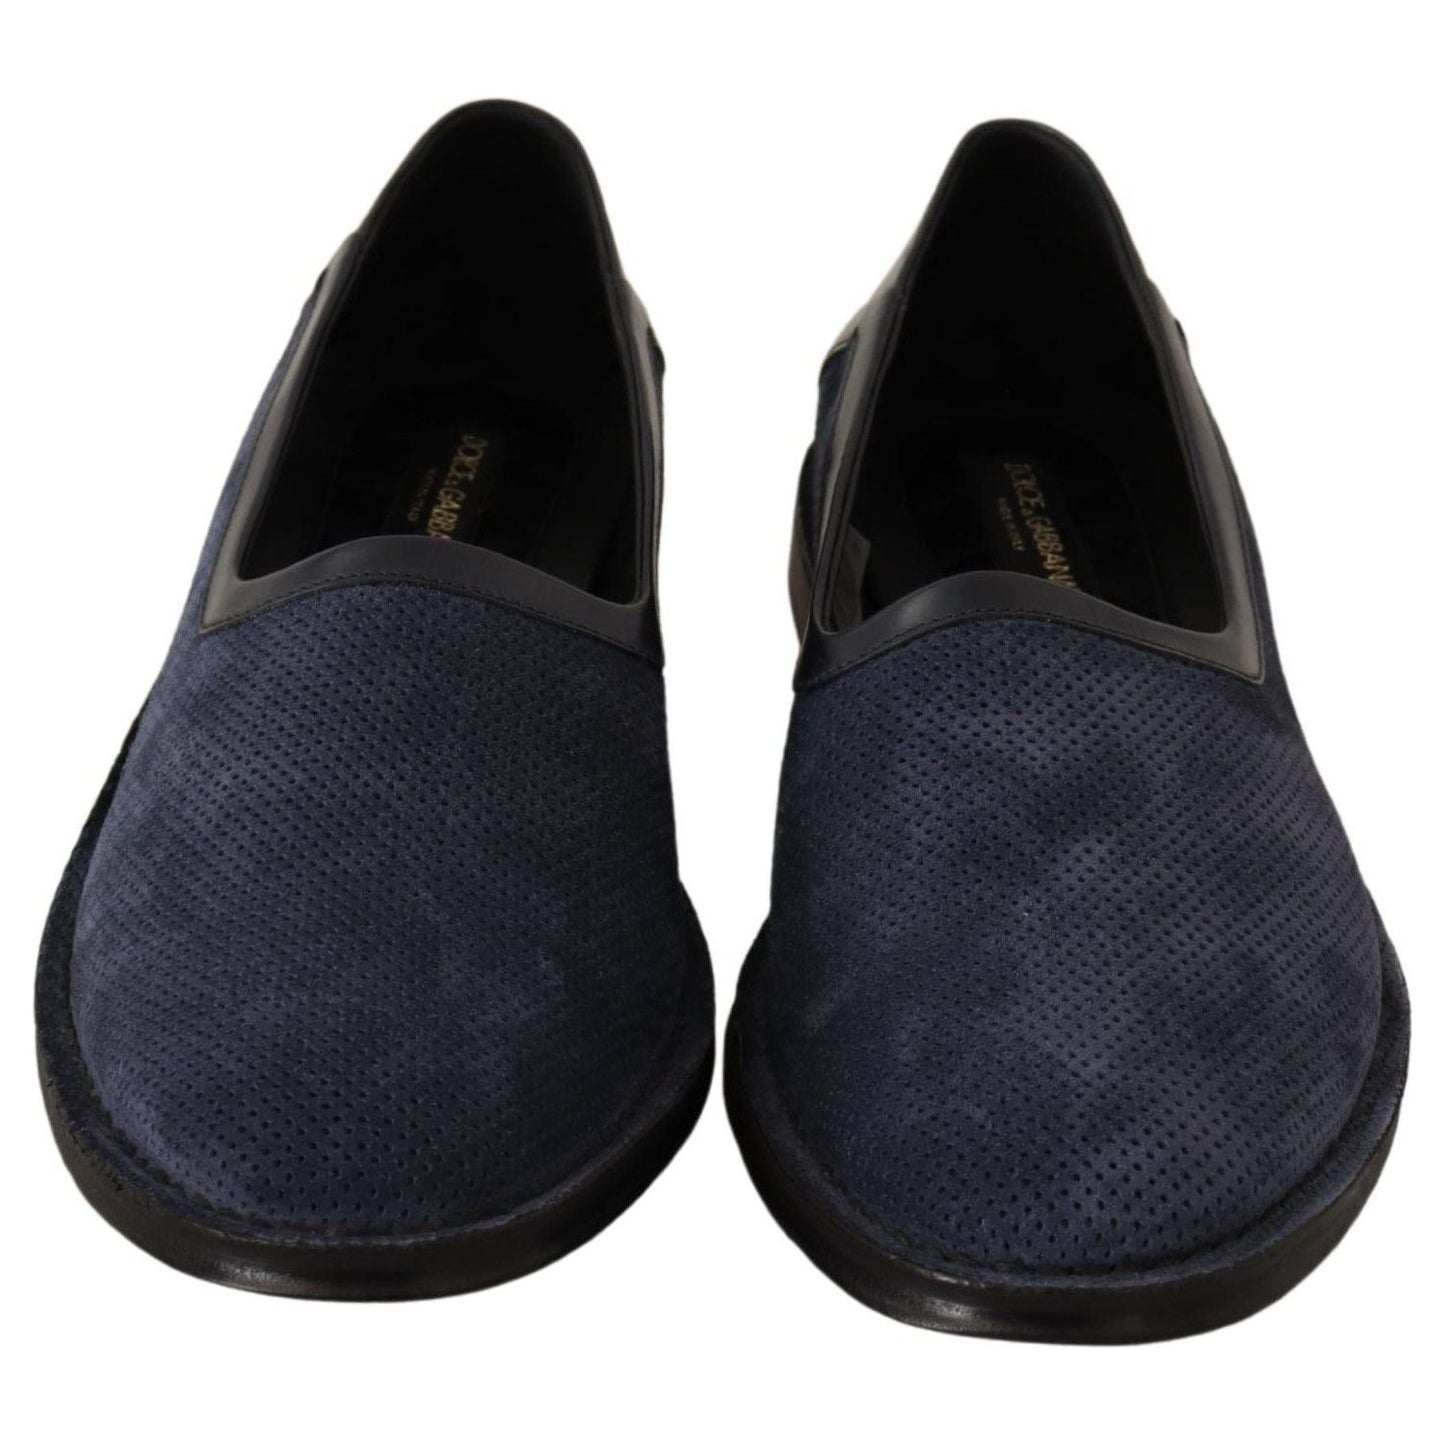 Dolce & Gabbana Elegant Perforated Leather Loafers MAN LOAFERS blue-leather-perforated-slip-on-loafers-shoes